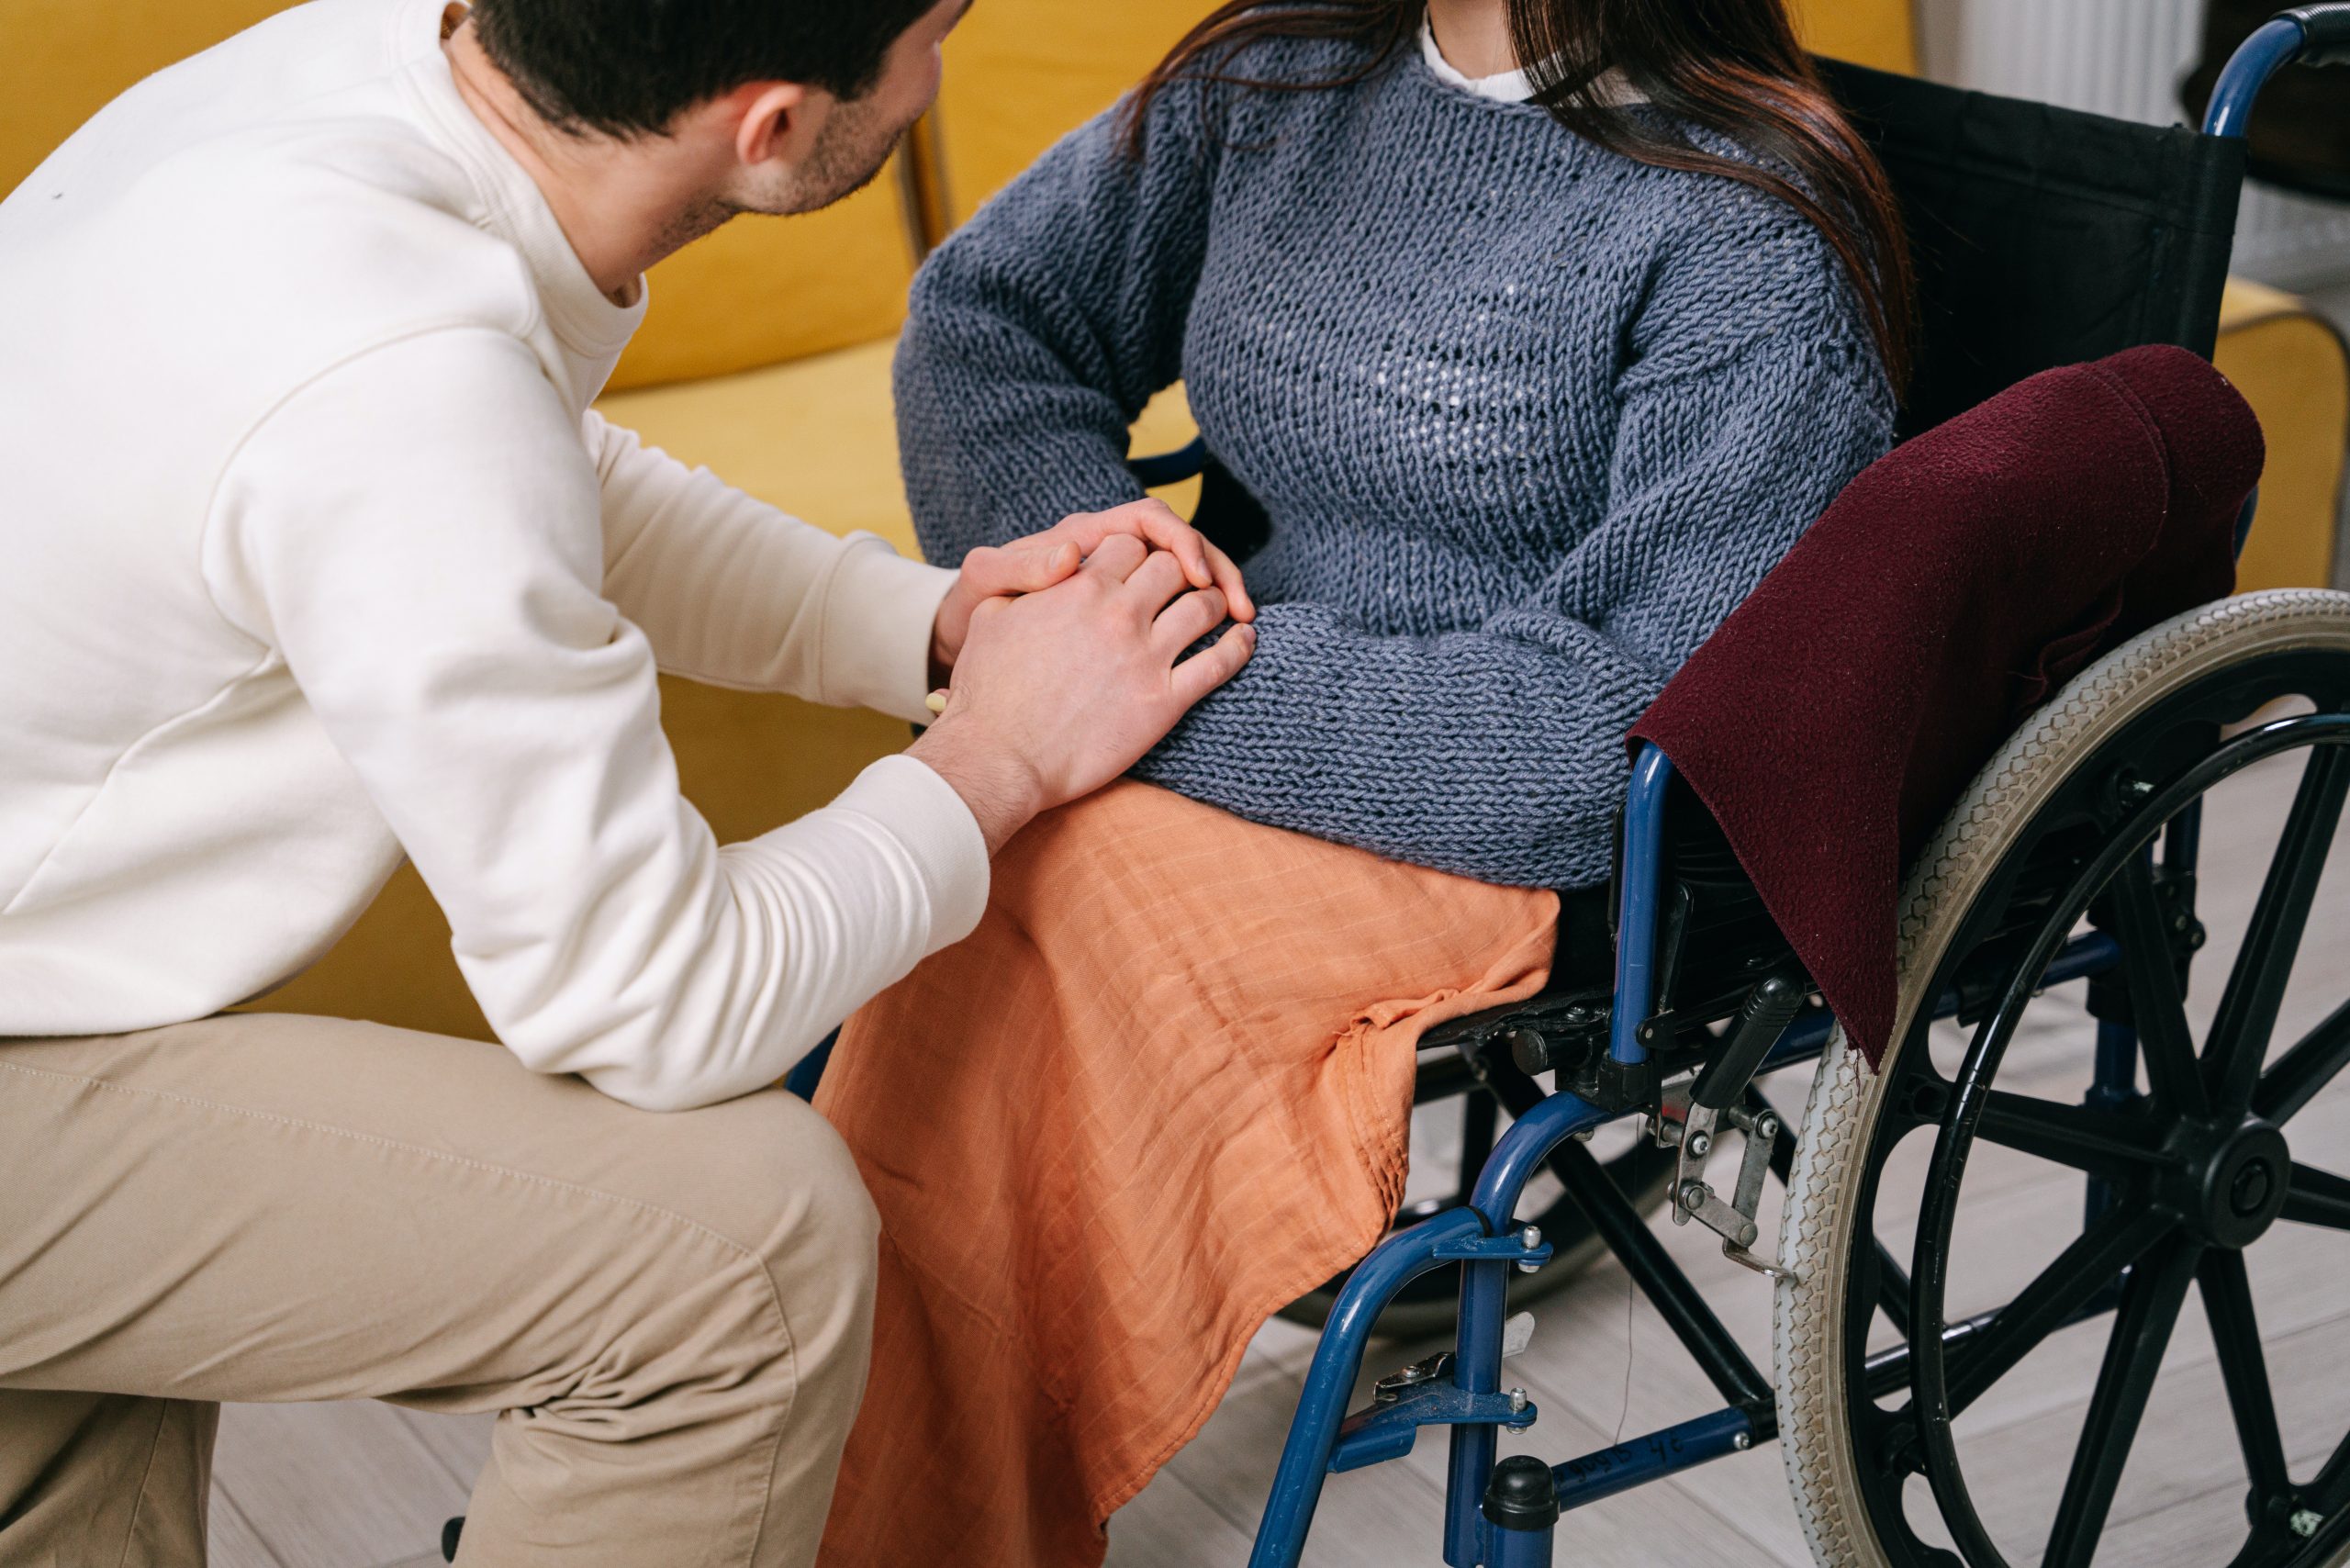 A person in a white shirt and tan trousers holds he hand of a wheelchair using woman